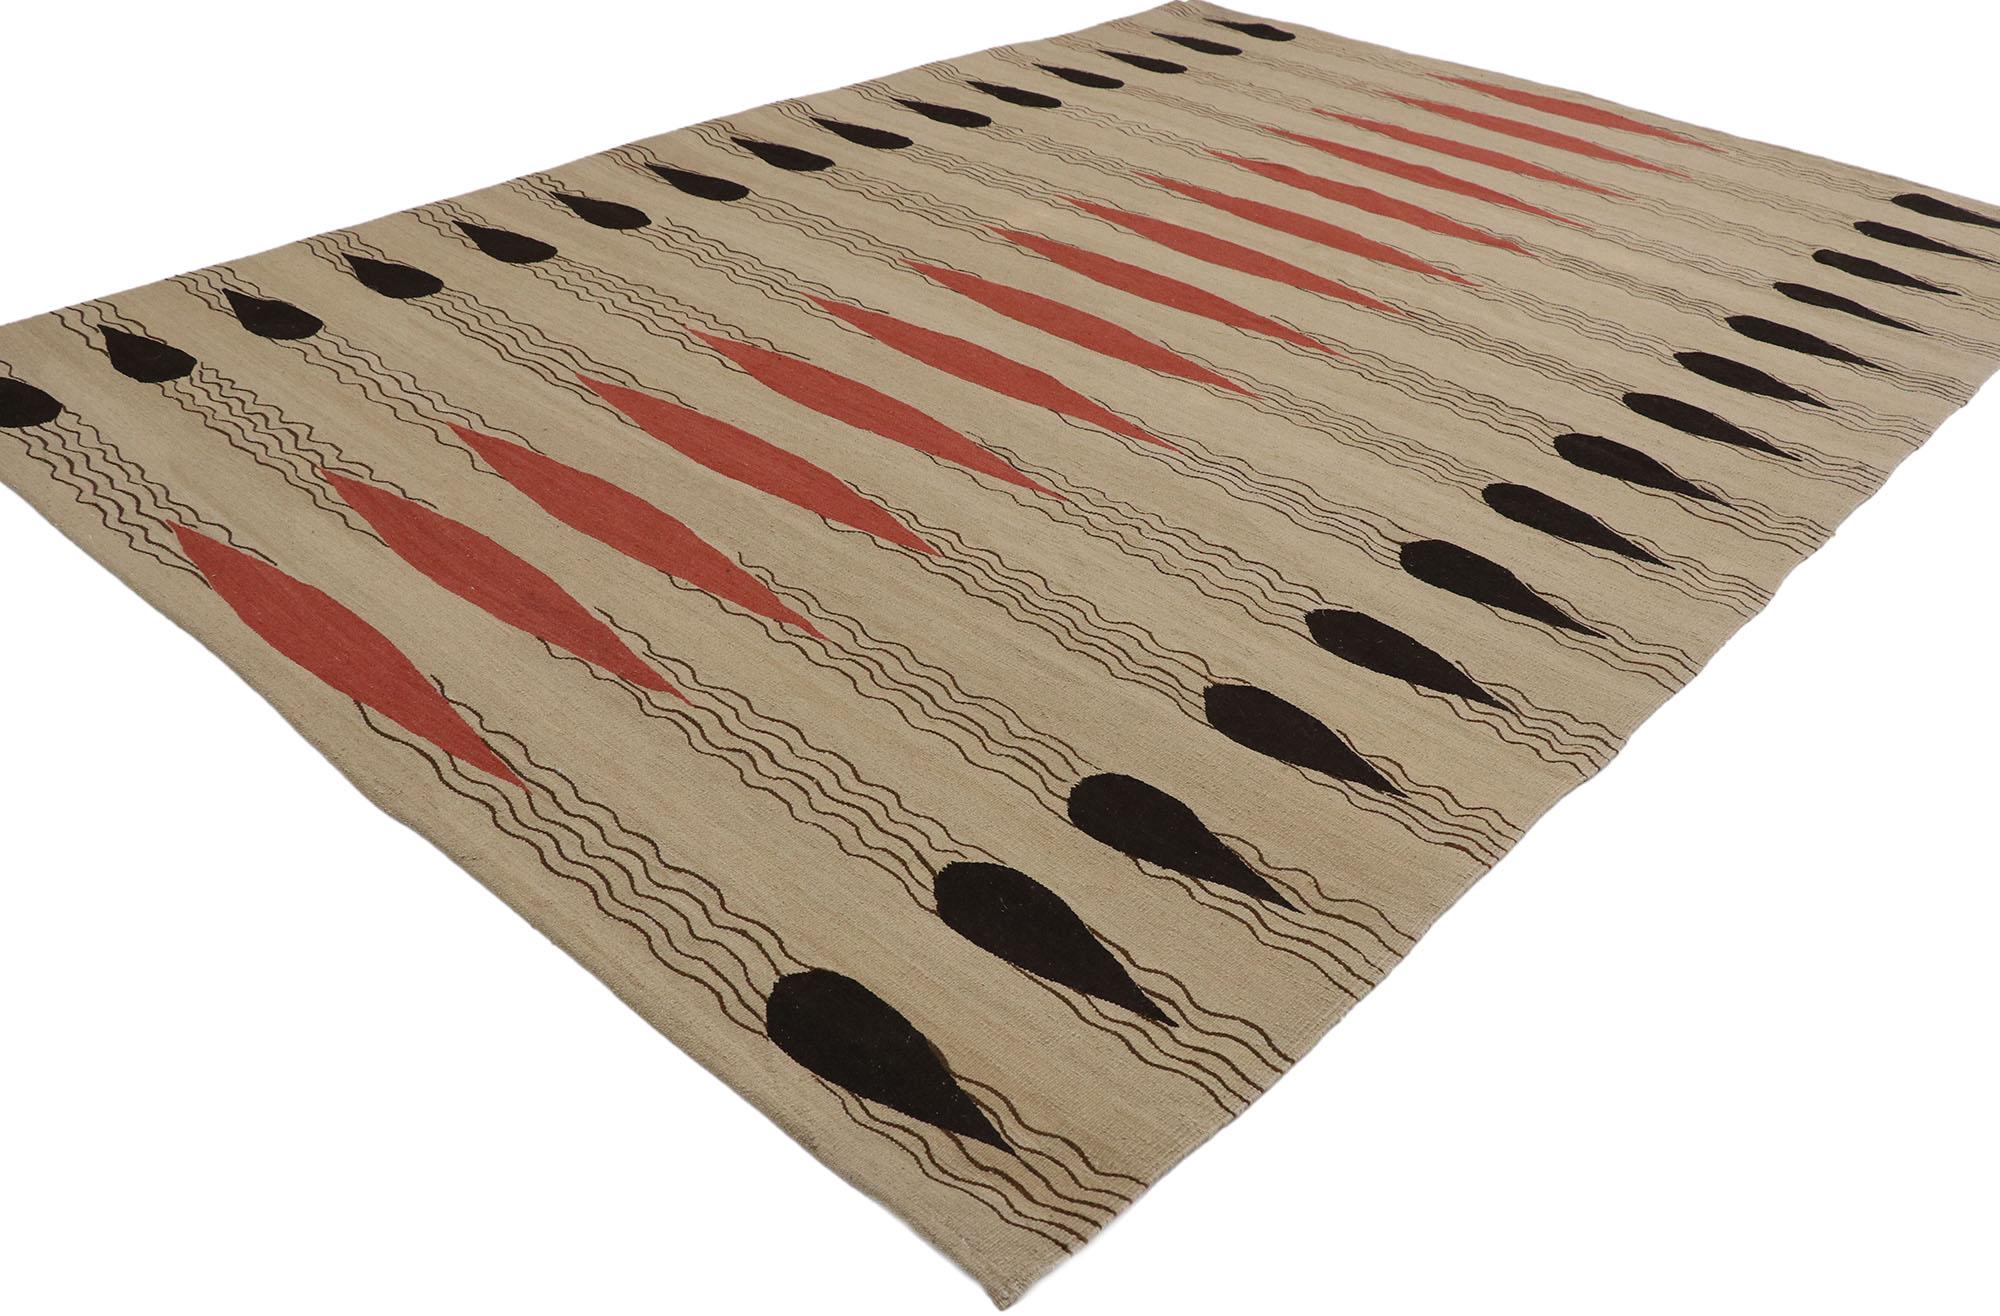 77536, vintage Turkish Kilim rug with Modern Navajo style. With its bold expressive design, incredible detail and texture, this hand-woven wool vintage Turkish Kilim rug is a captivating vision of woven beauty highlighting Navajo style. It features